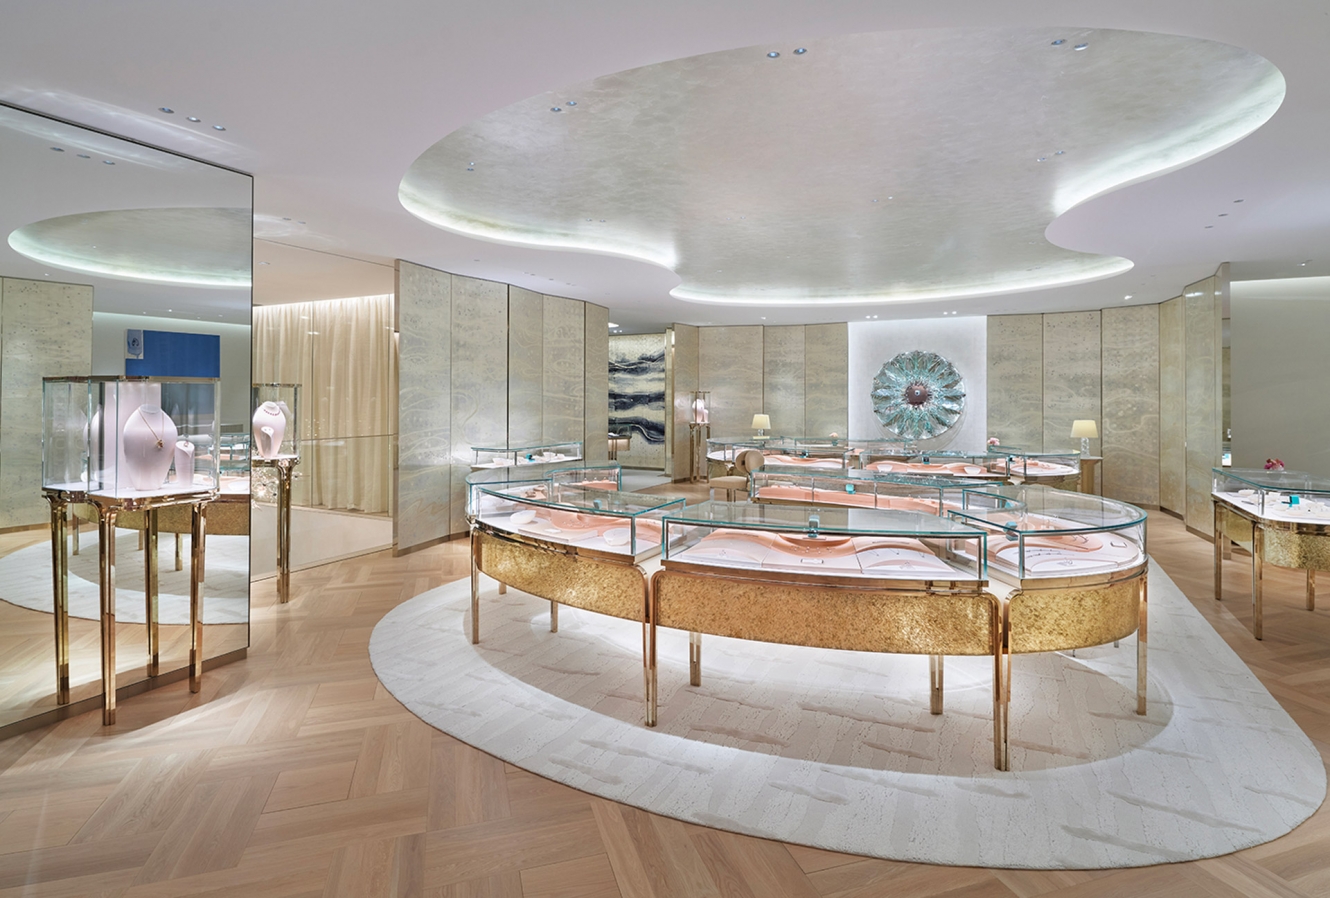 The newly renovated Louis Vuitton store in Tokyo